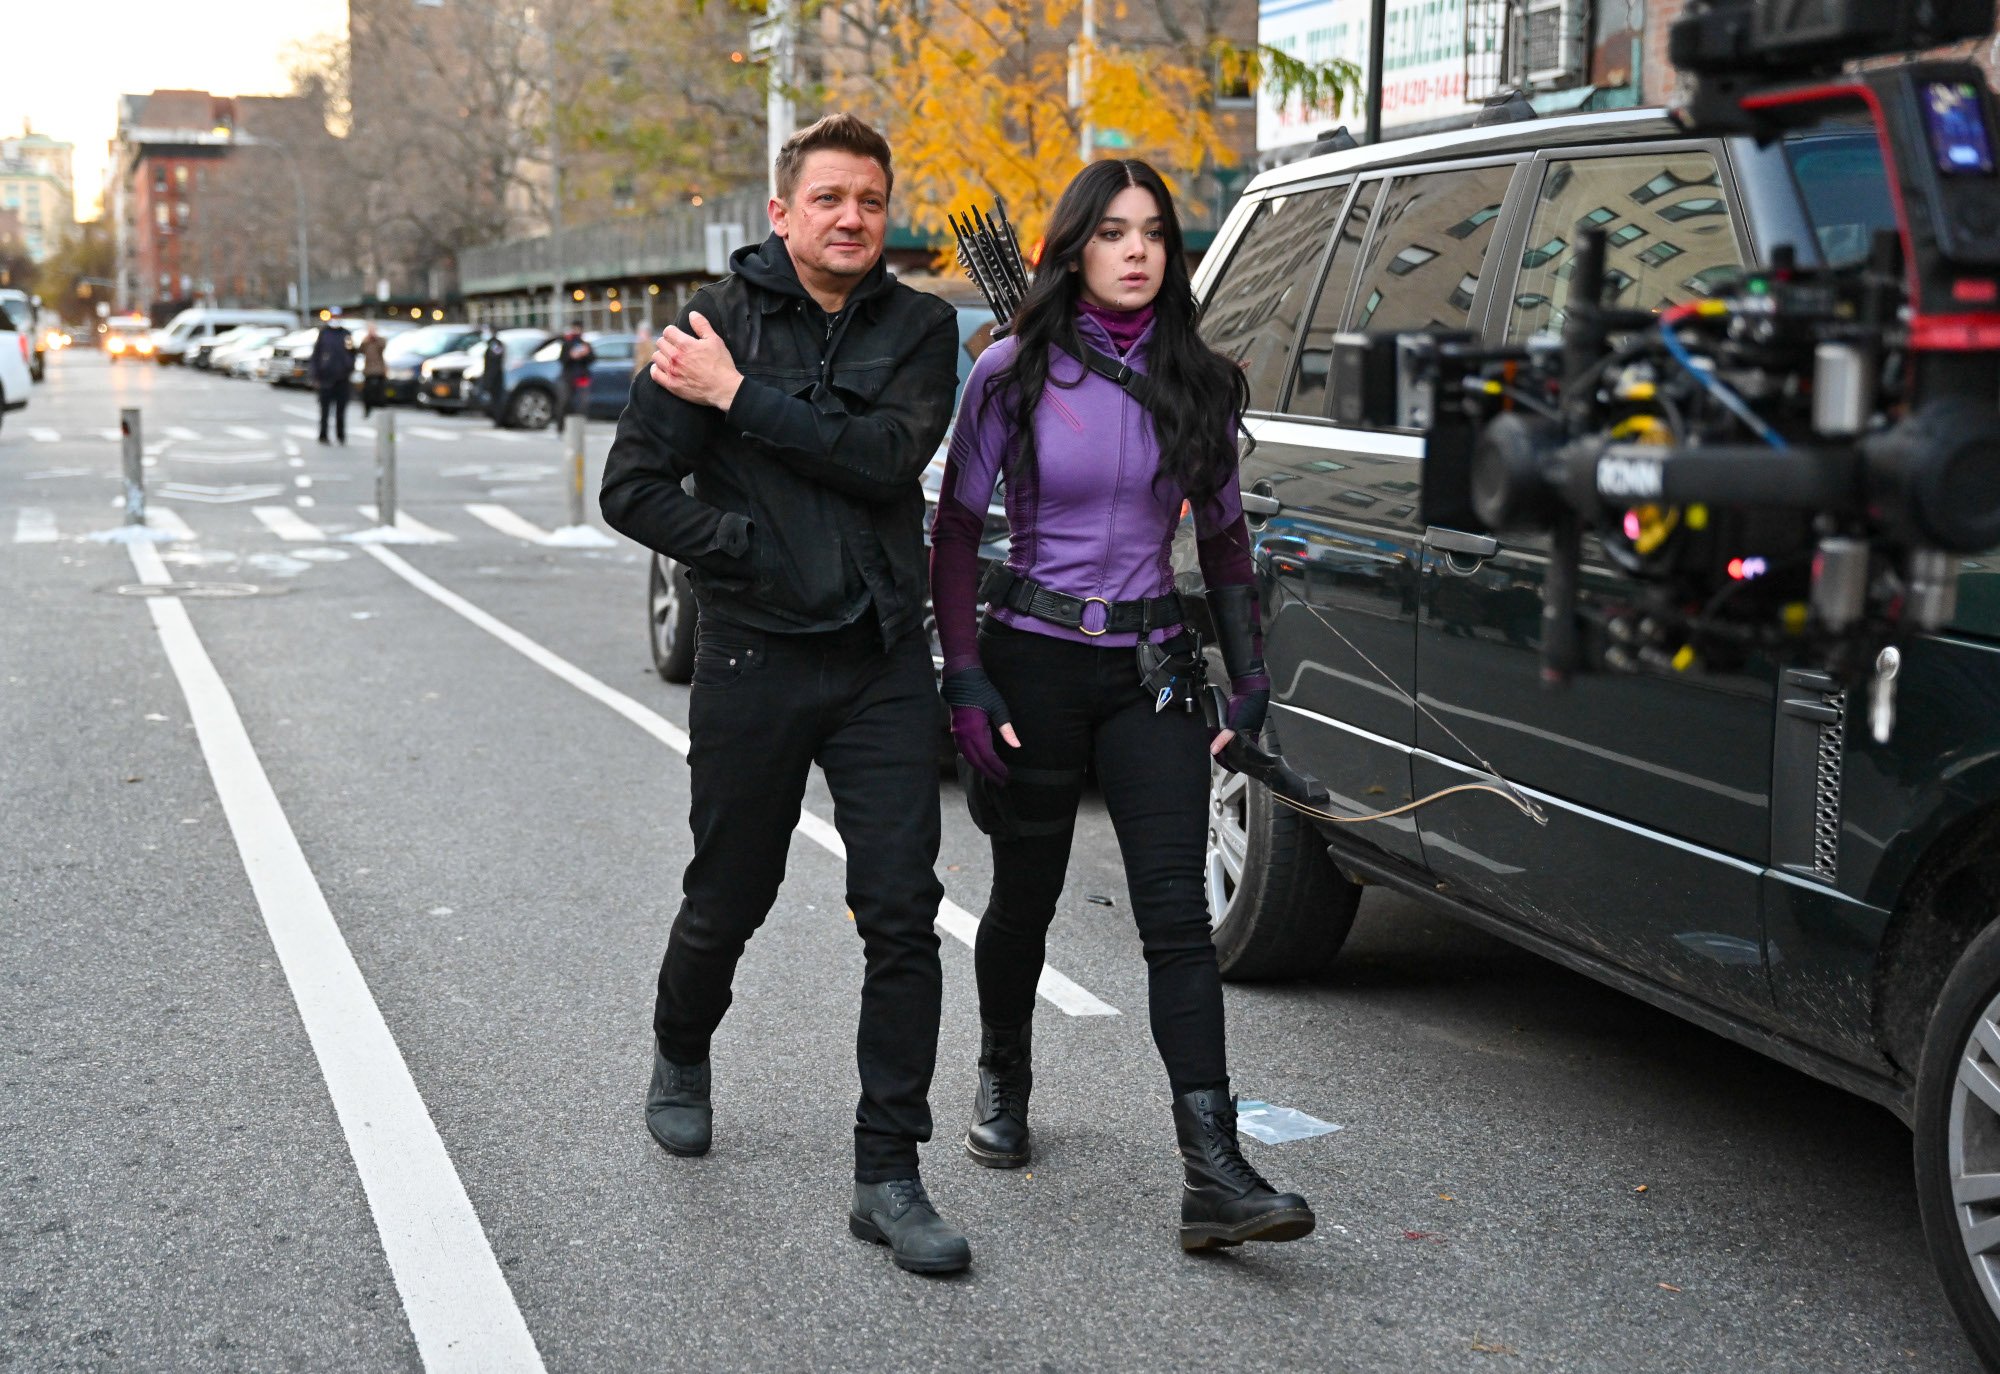 Jeremy Renner and Hailee Steinfeld walking down the street while filming Marvel's Hawkeye series -- She's wearing a black and purple costume and carrying her arrows and he's dressed in all black